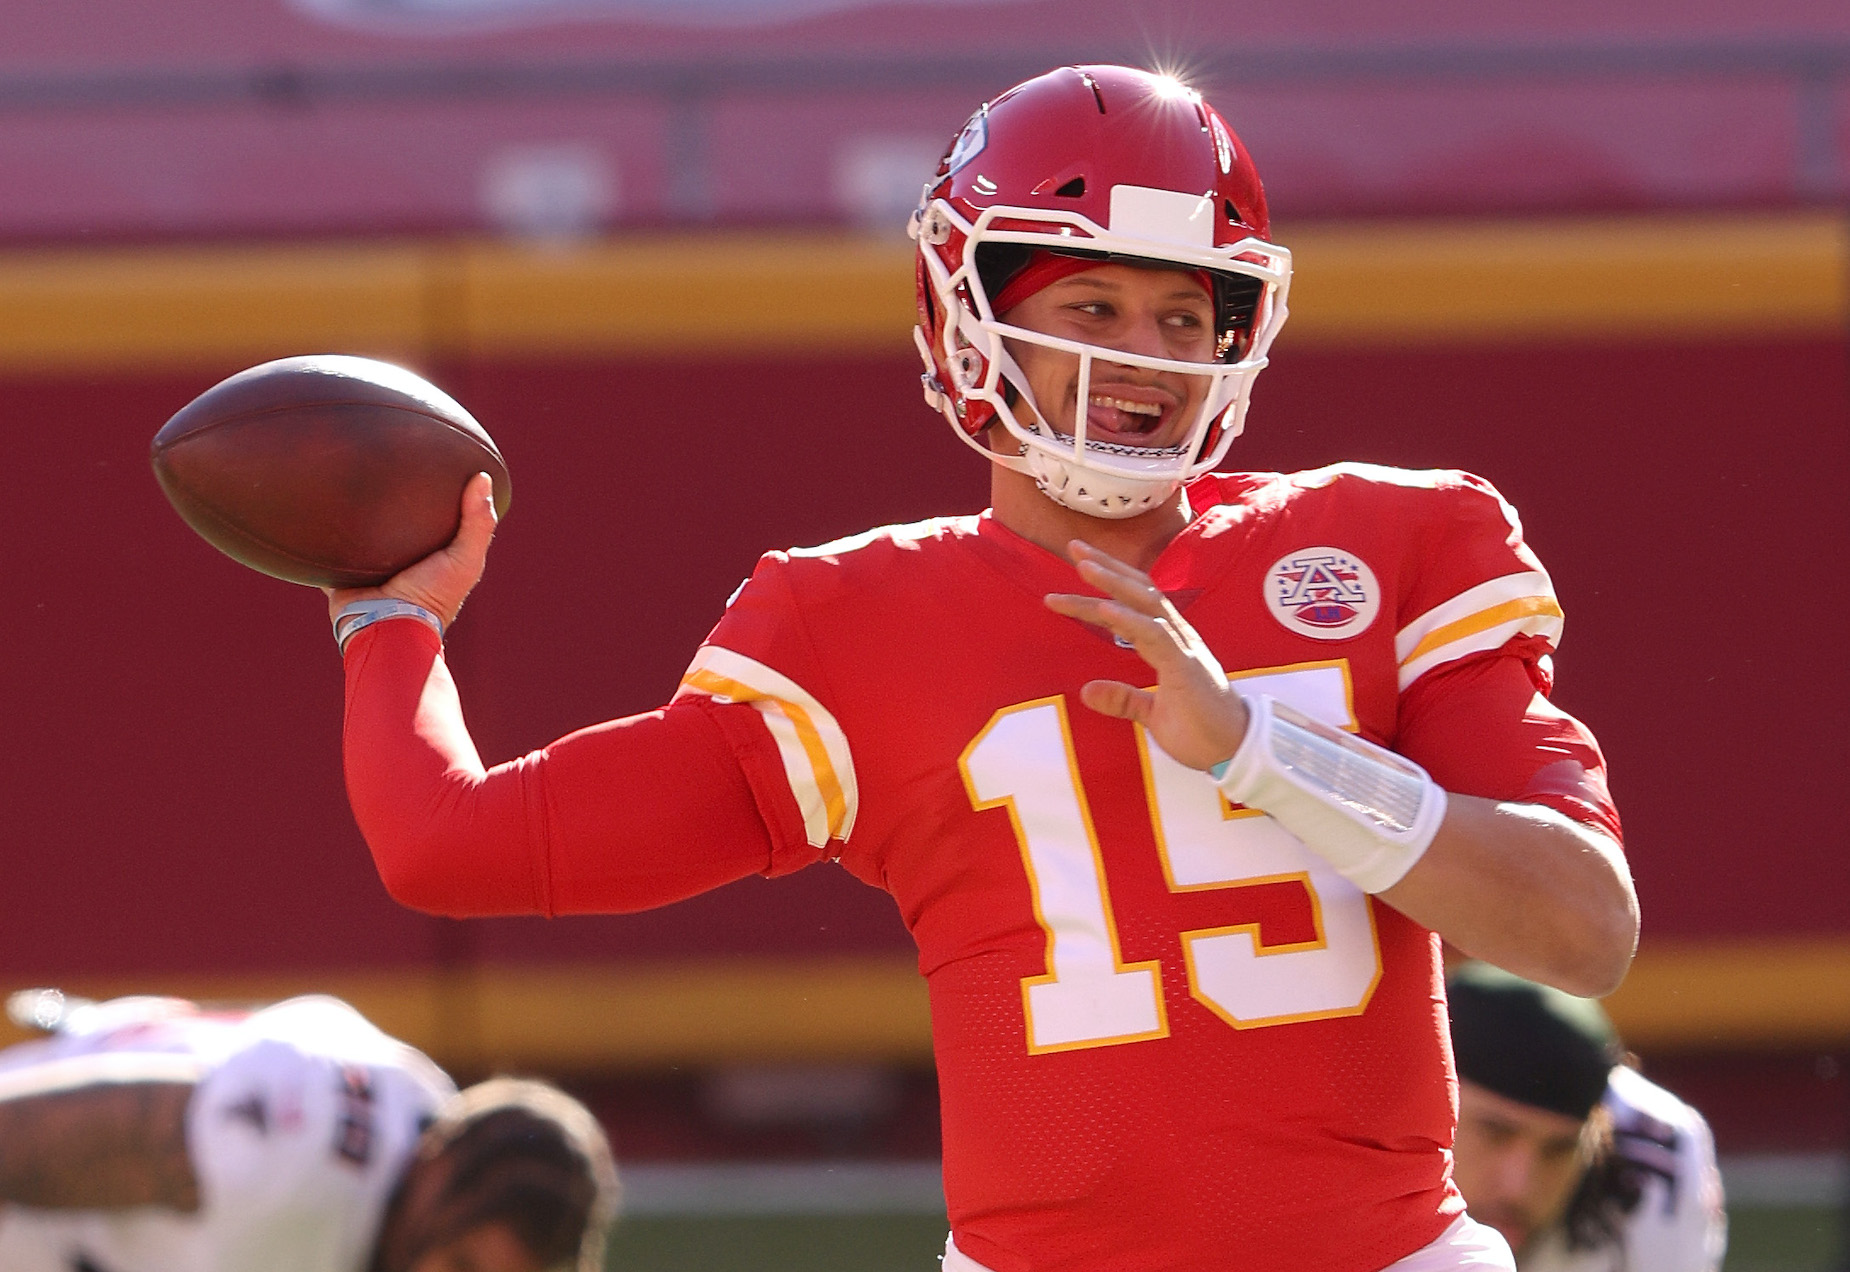 Whether he's playing for the Kansas City Chiefs or riding his Peloton, Patrick Mahomes is always competing